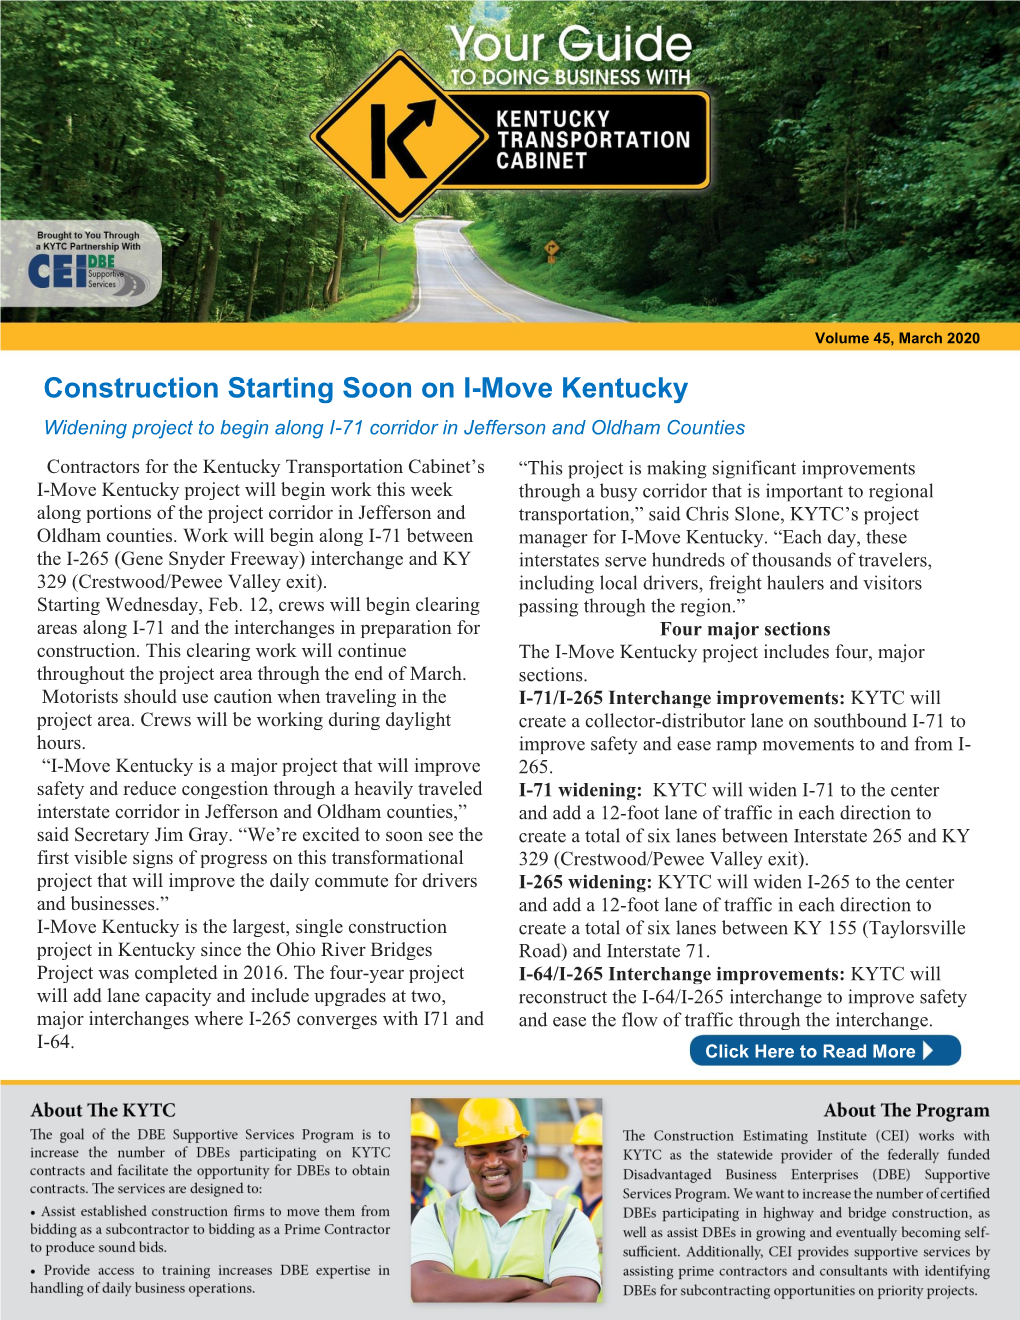 Construction Starting Soon on I-Move Kentucky Widening Project to Begin Along I-71 Corridor in Jefferson and Oldham Counties